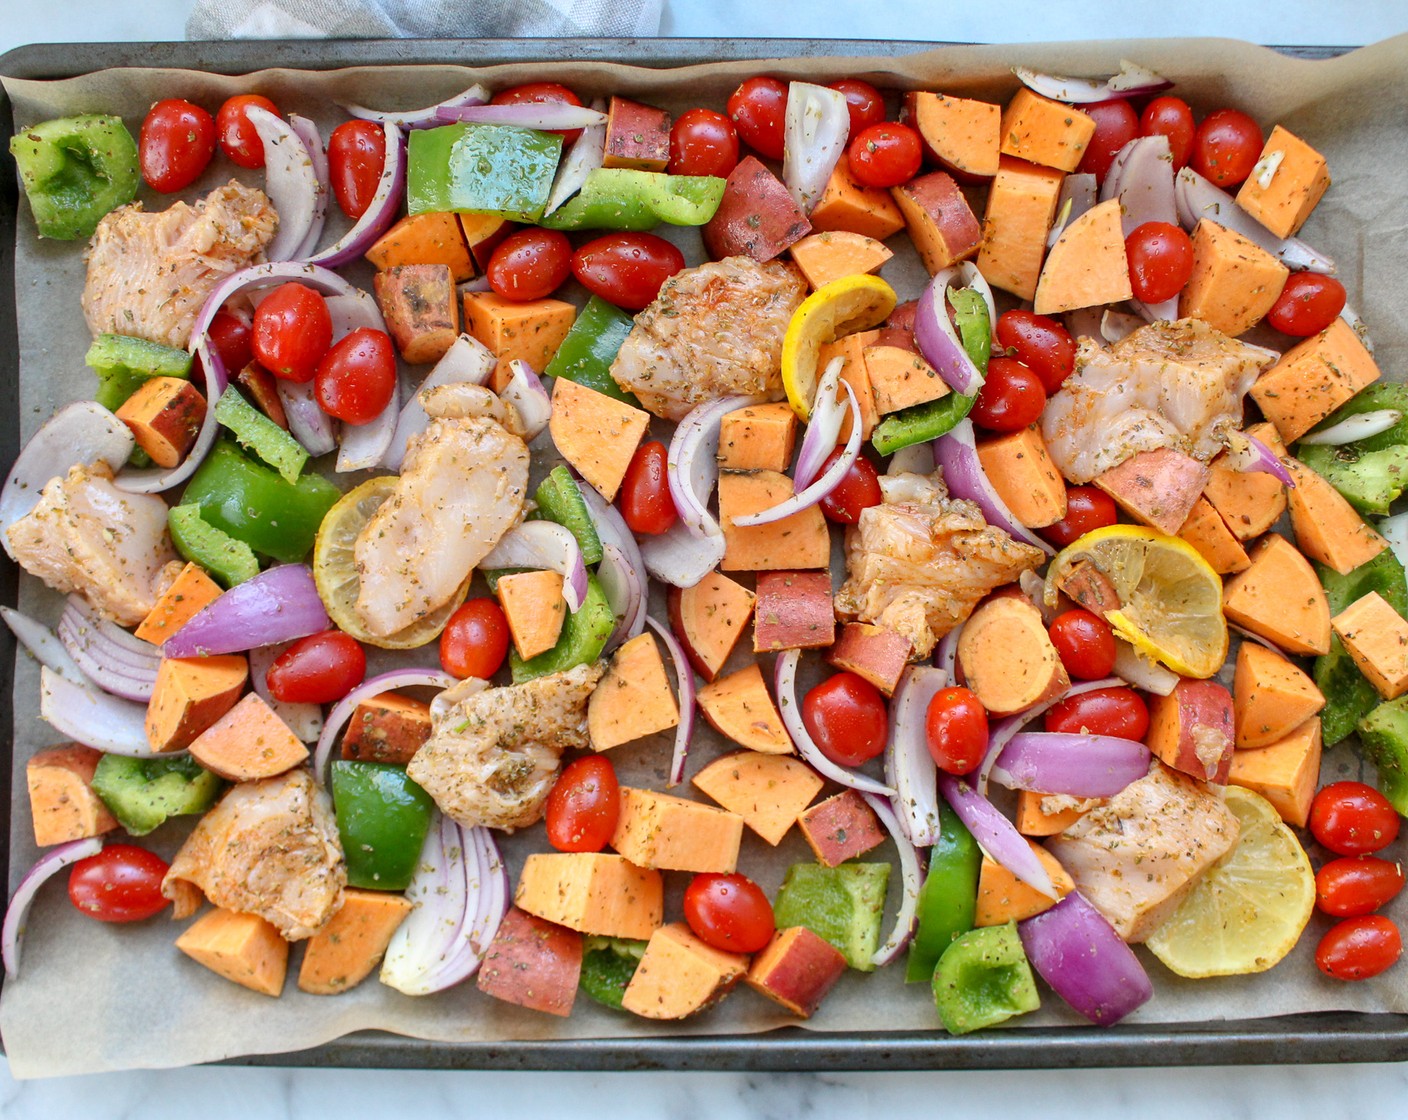 step 5 Add remaining veggies and chicken to the baking sheet after the first 20 minutes and continue cooking at 375 degrees F (190 degrees C) for 20 minutes, until the internal temperature of the chicken reaches 165 degrees F (75 degrees C) and the vegetables are soft to bite.